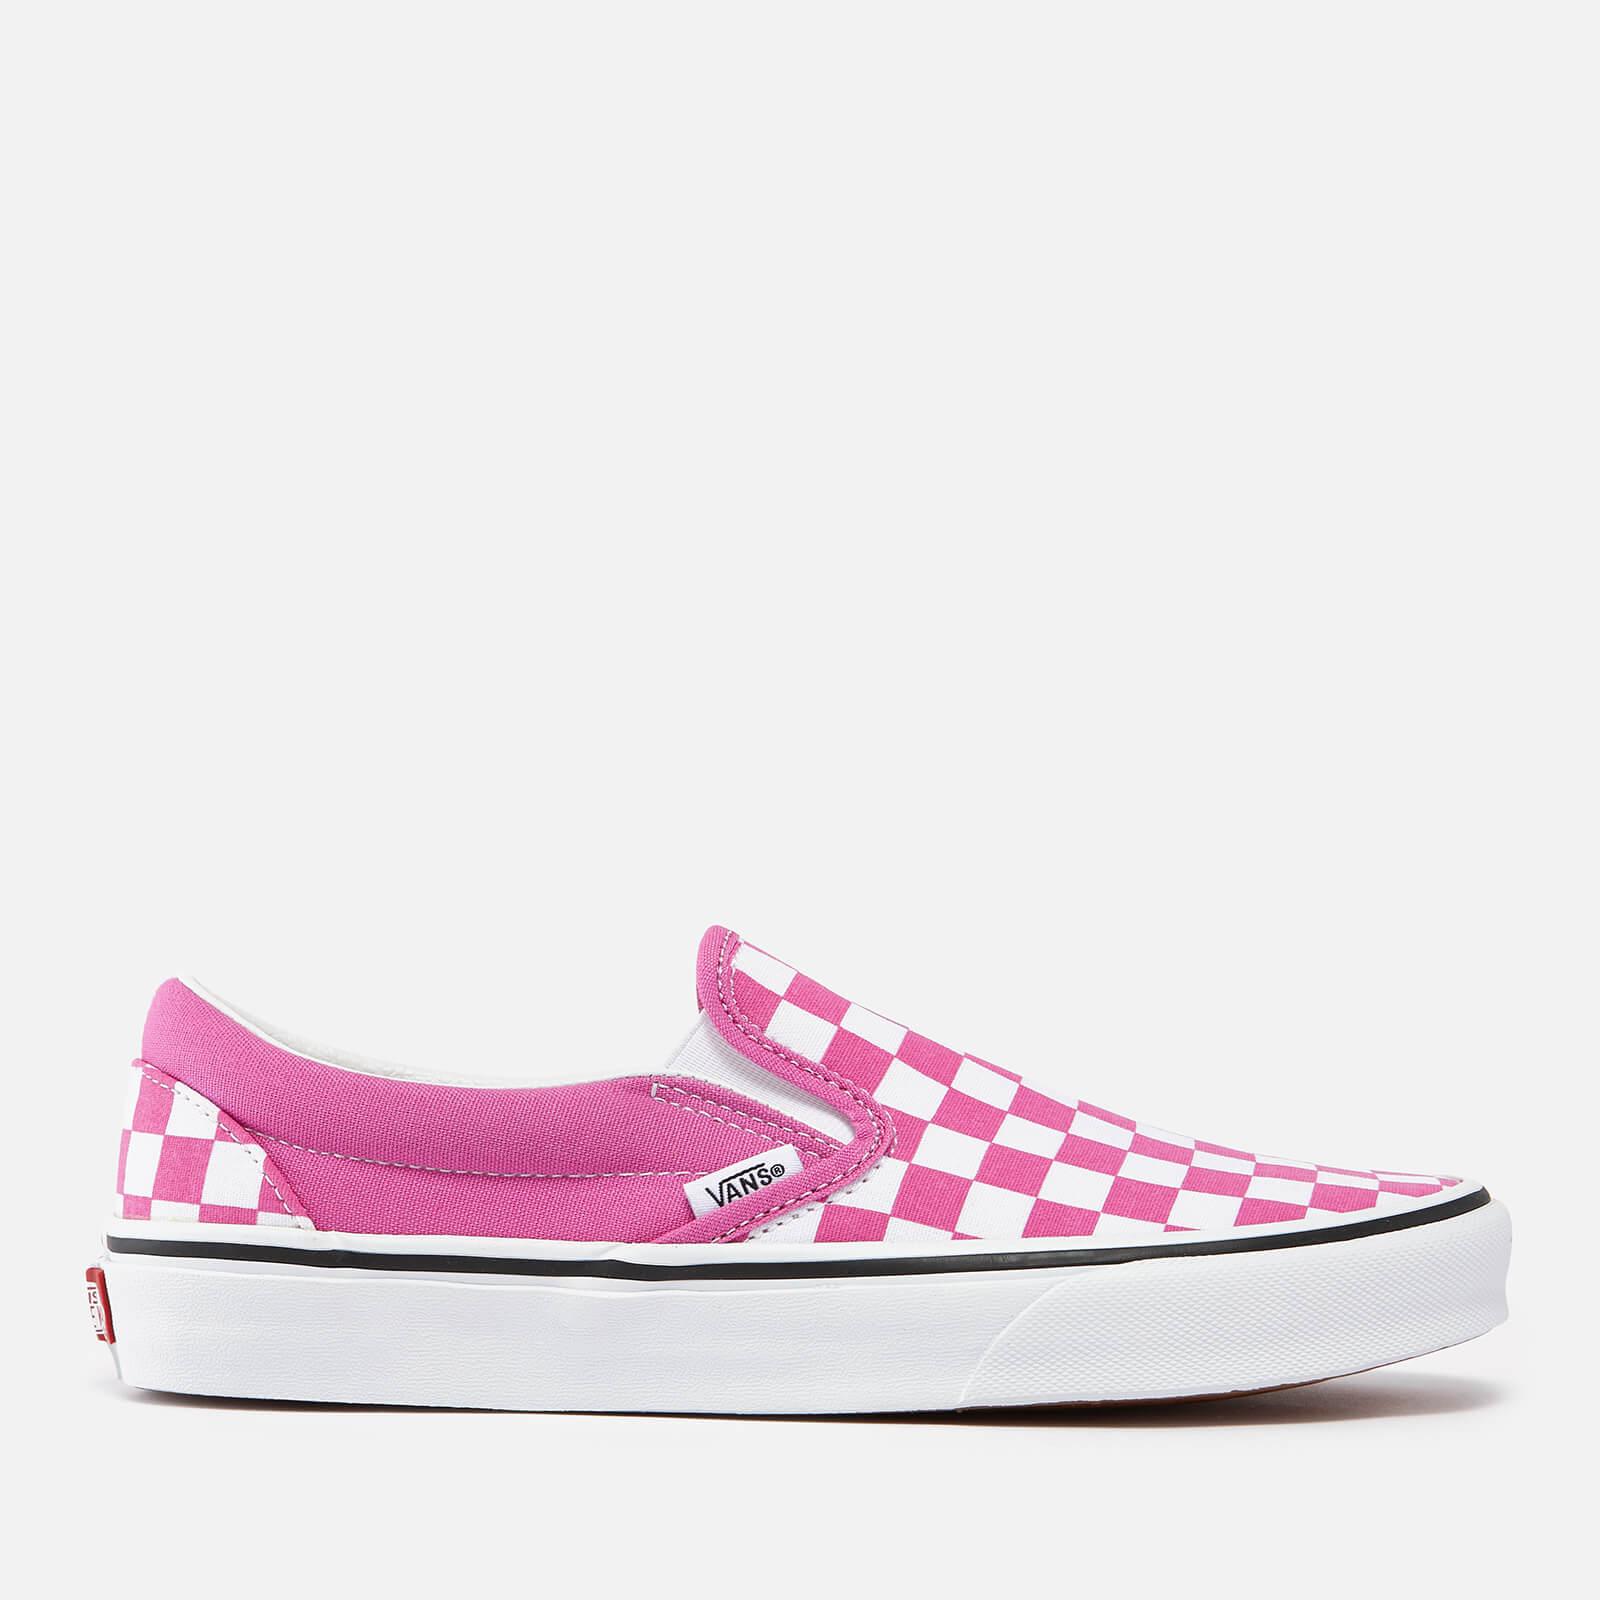 Vans Canvas Checkerboard Classic Slip-on Trainers in Pink | Lyst